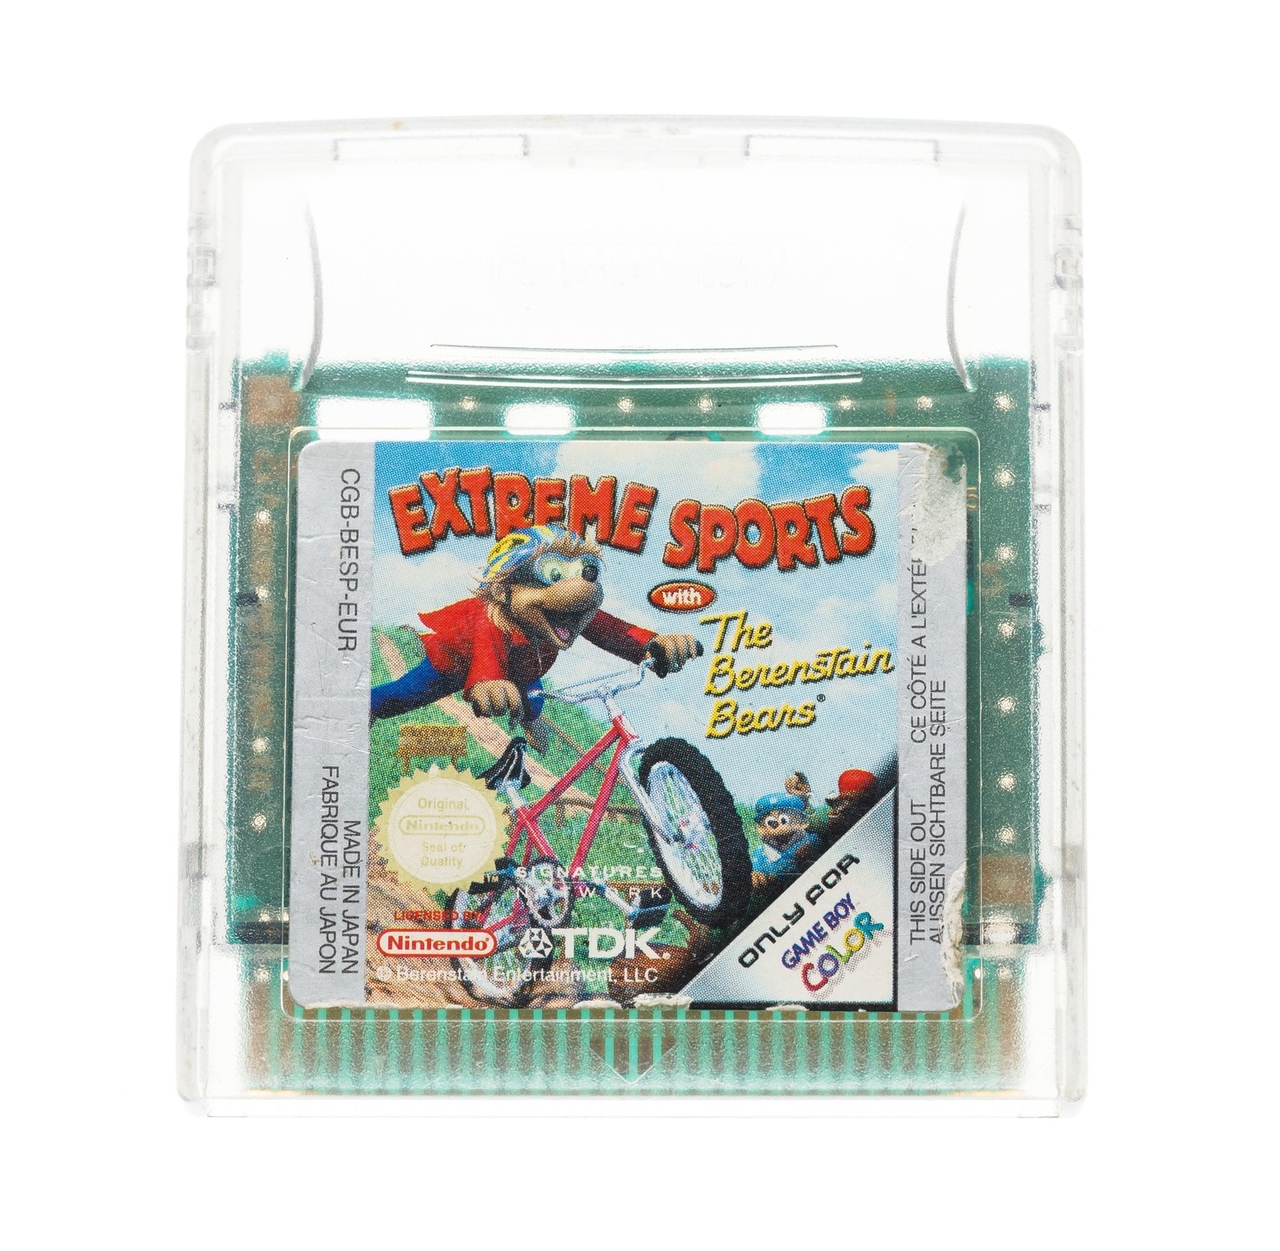 Extreme Sports with the Berenstain Bears - Gameboy Color Games